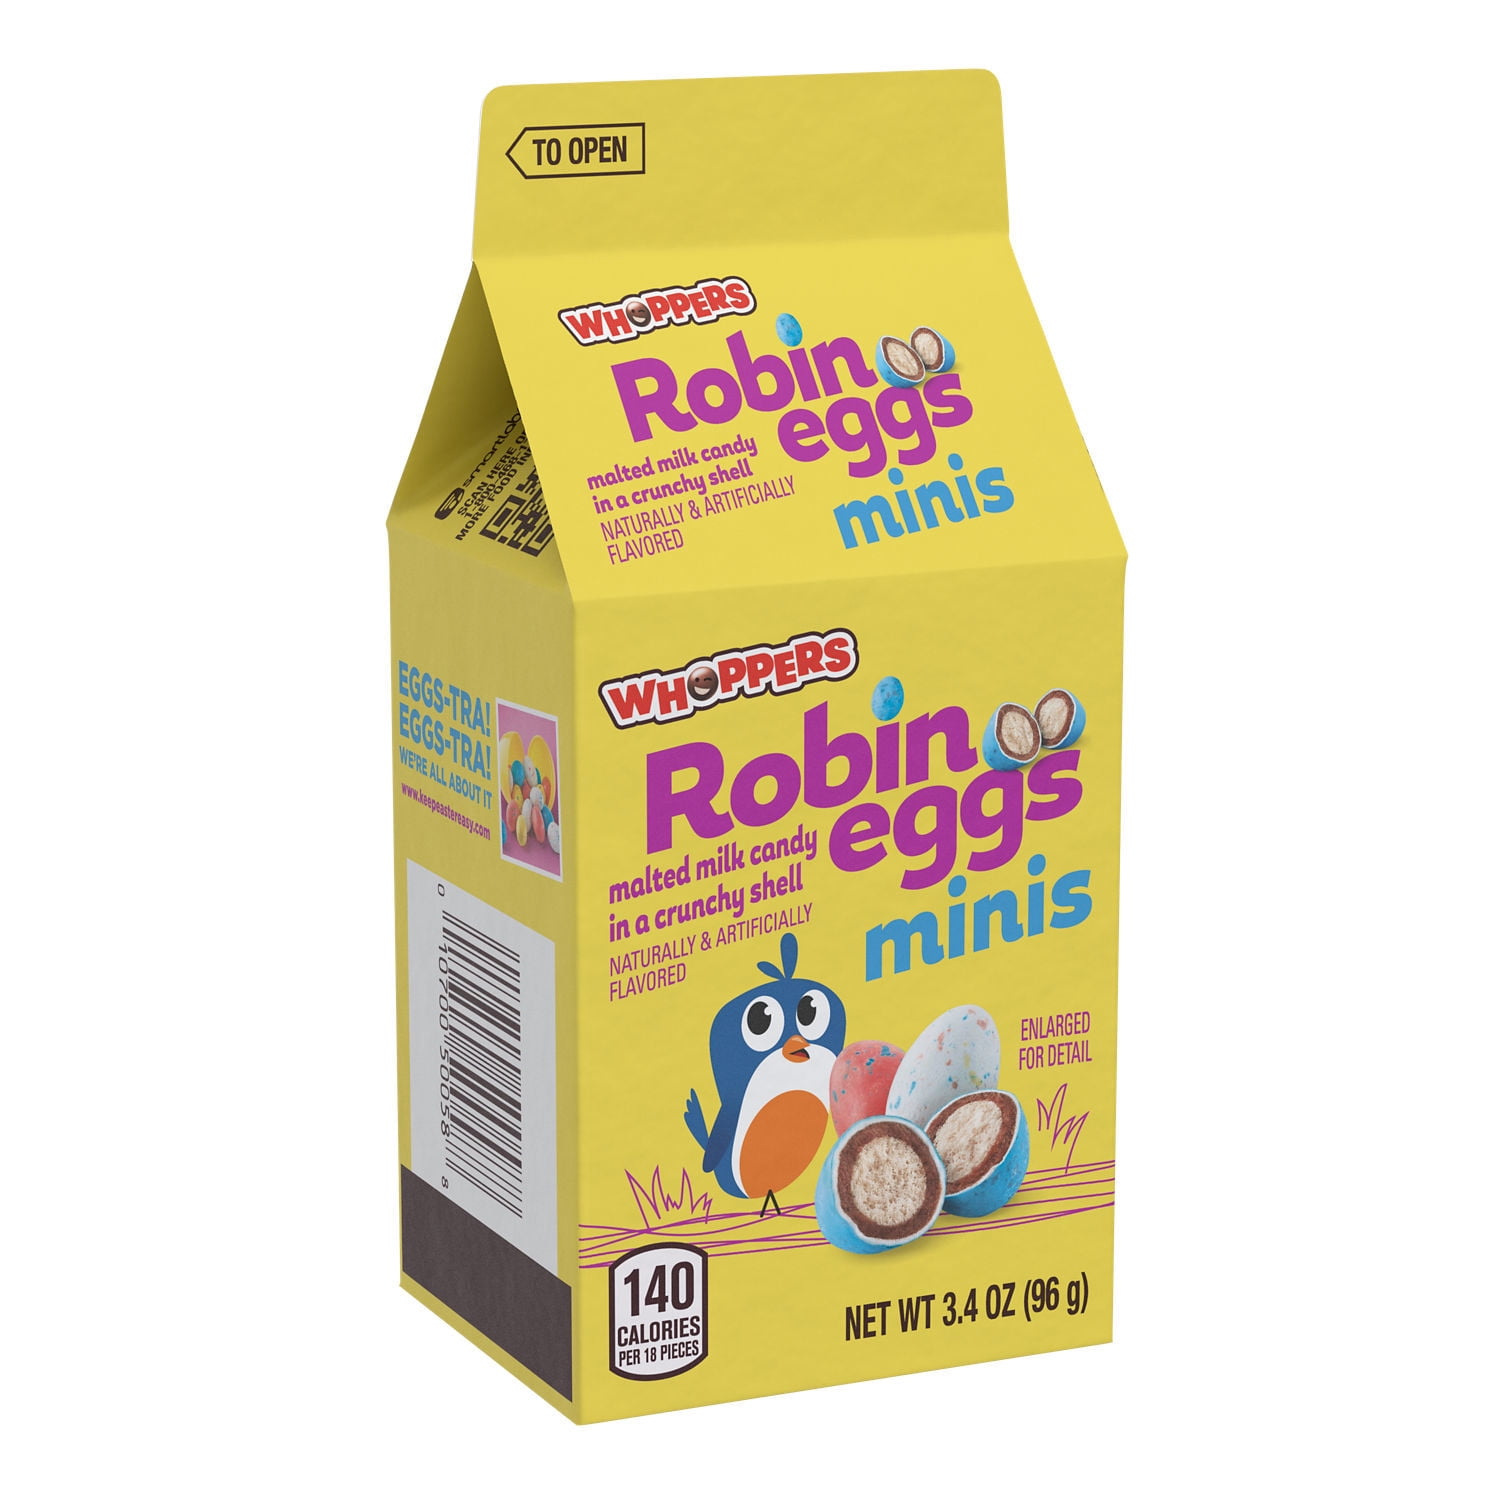 Whoppers Robin Eggs Minis Malted Milk Balls Easter Candy, Carton